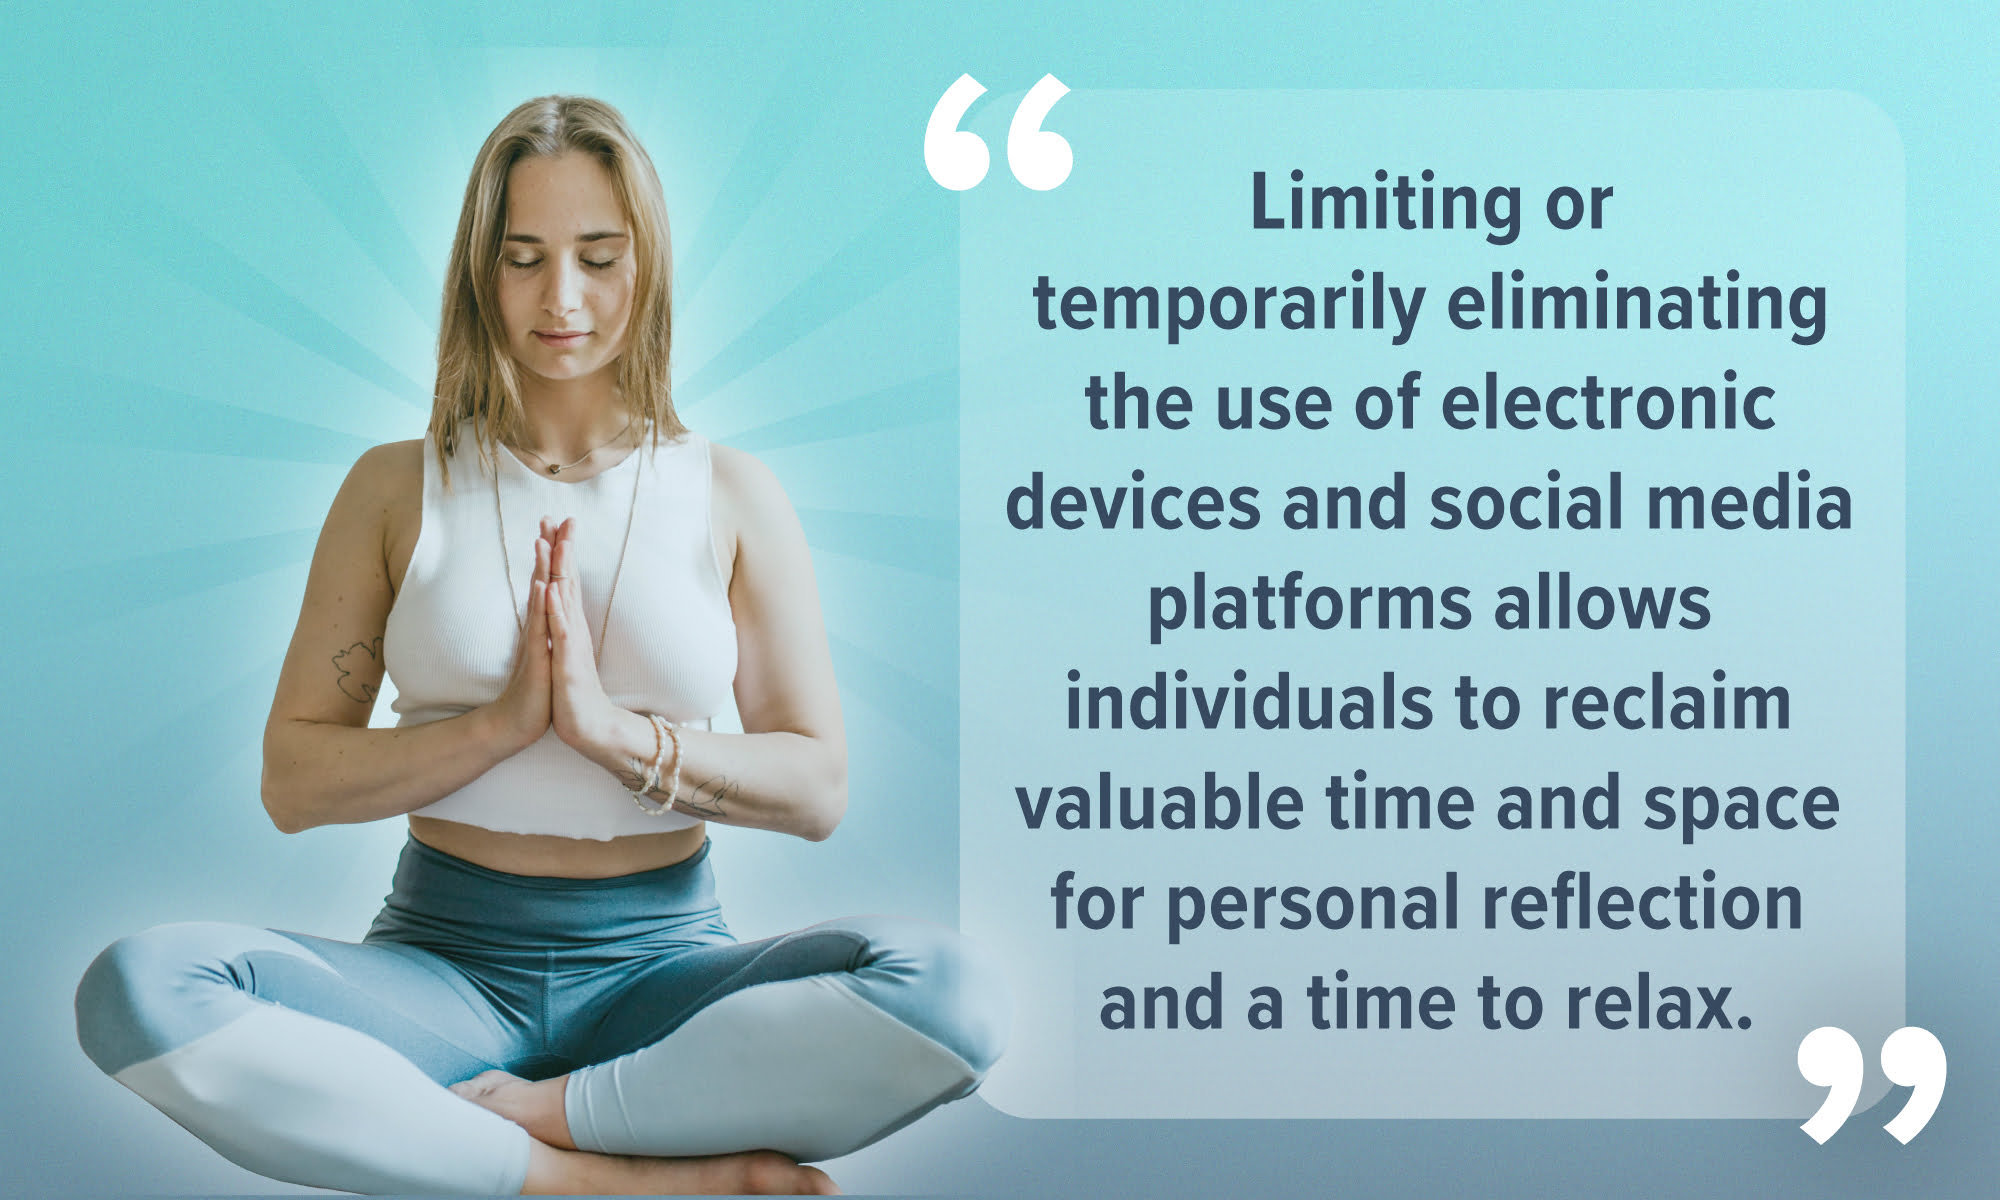 An image featuring a meditating woman alongside a quote: "Limiting or temporarily eliminating the use of electronic devices and social media platforms allows individuals to reclaim valuable time and space for personal reflection and a time to relax."